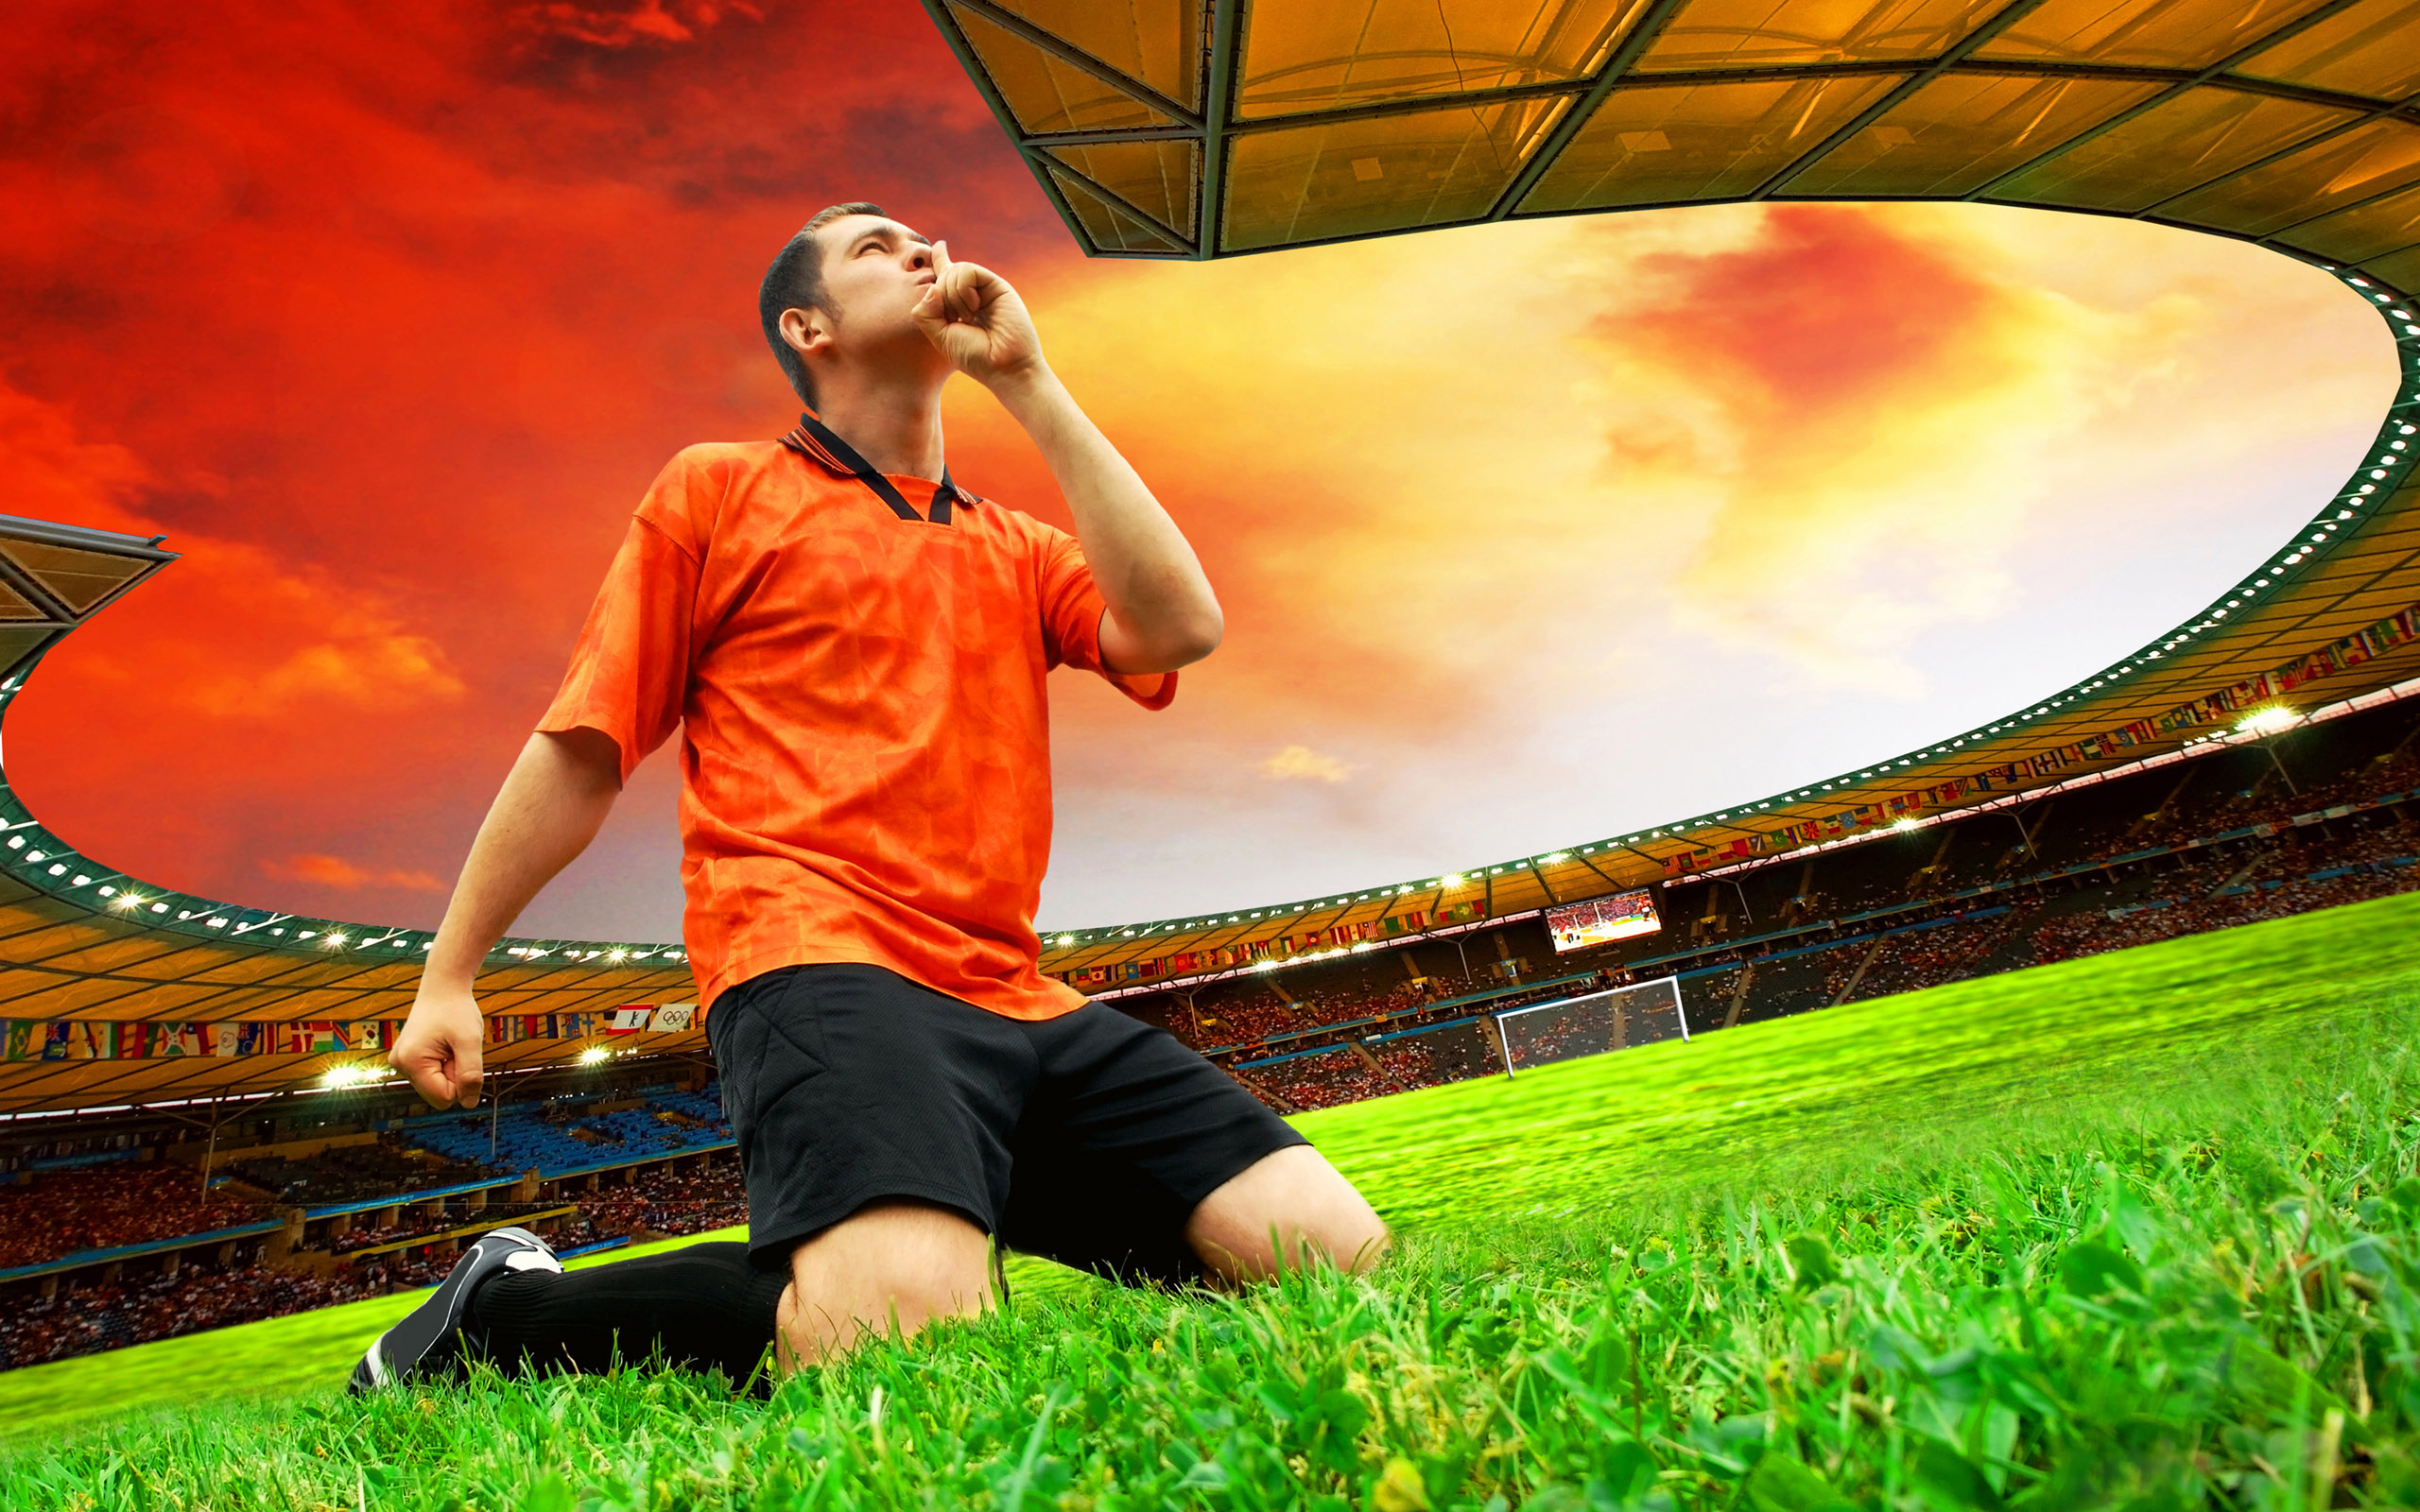 Hq Soccer On The Lawn Football Wallpaper Num